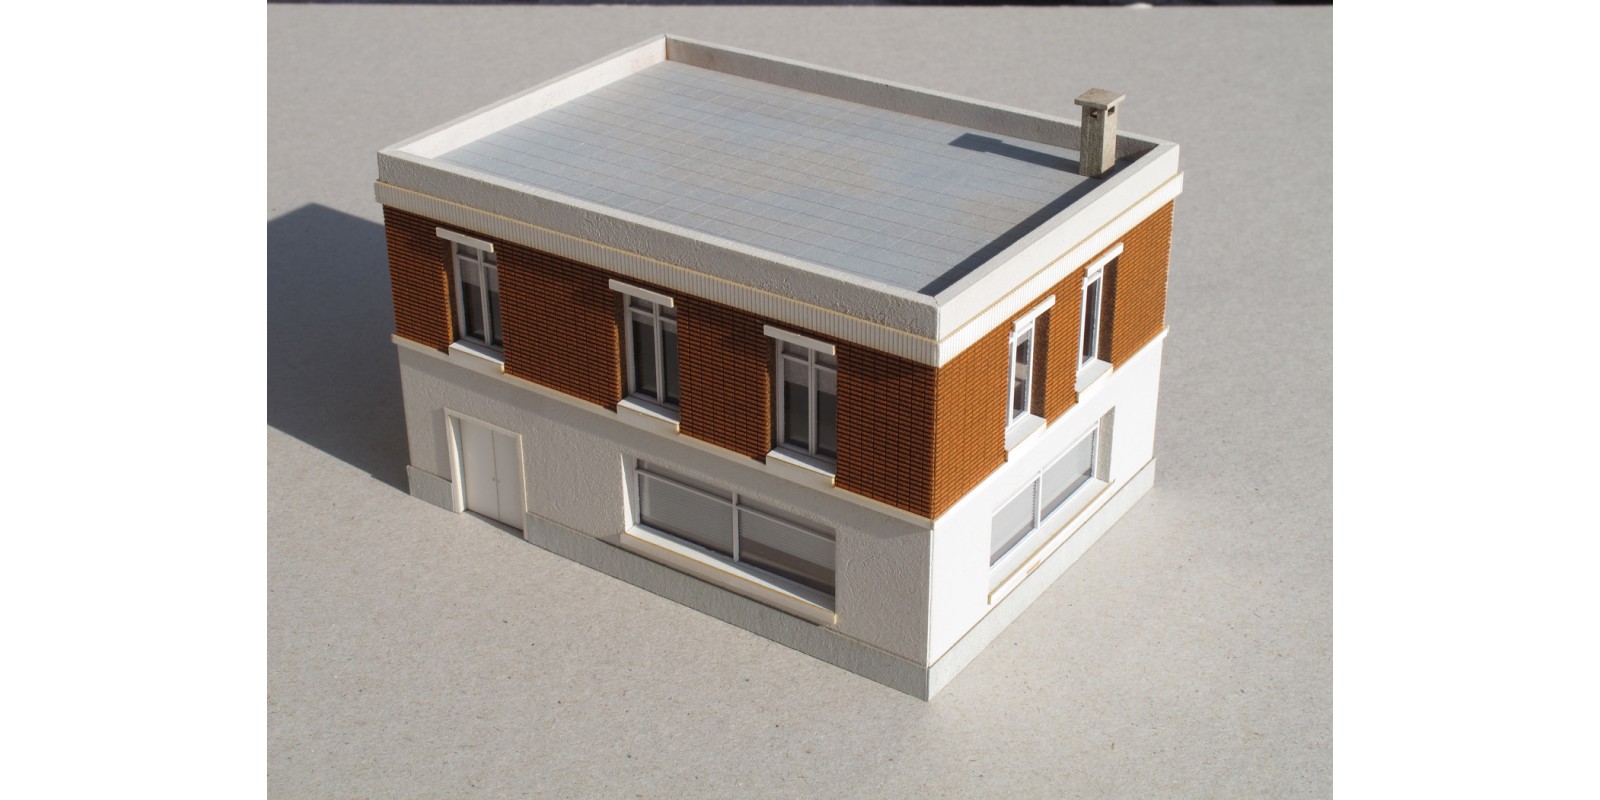 CMBV005-1  Office building R + 1 terracotta and concrete (small) - HO scale